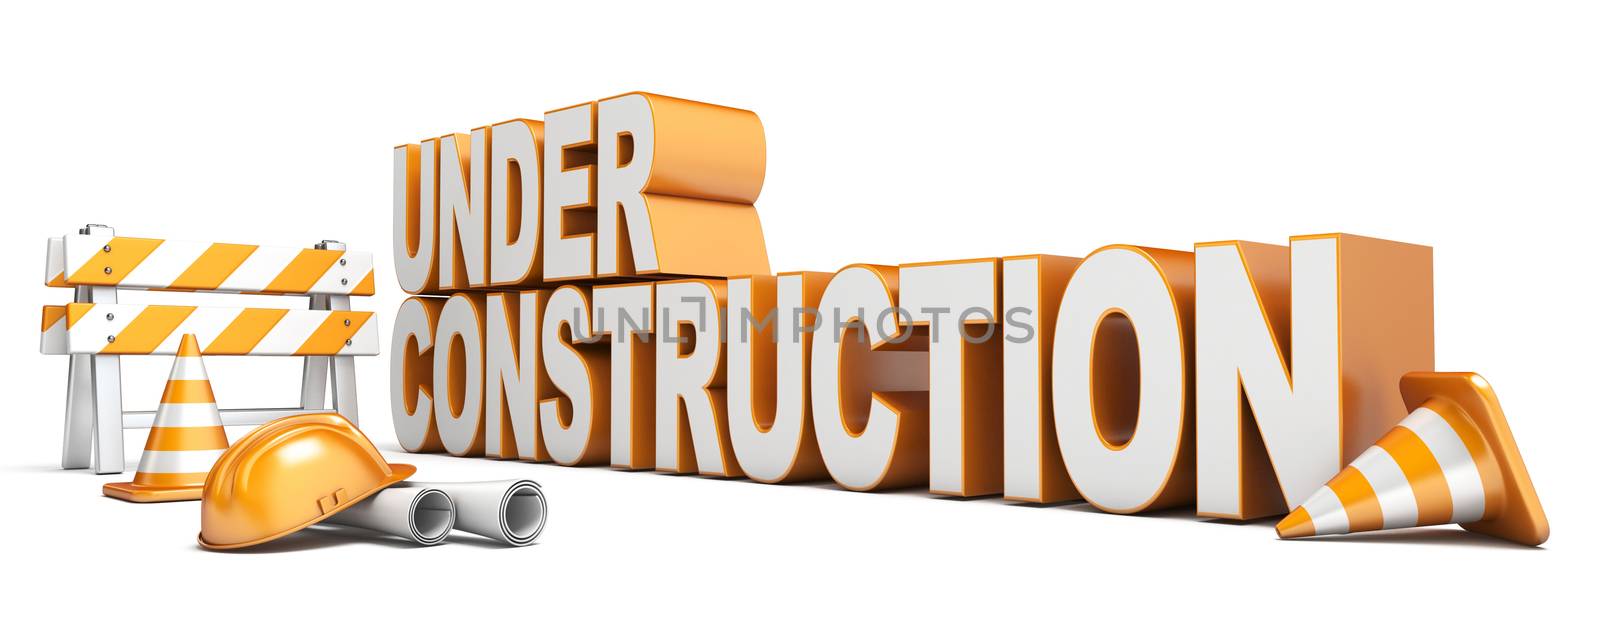 Under construction concept 3D render illustration isolated on white background